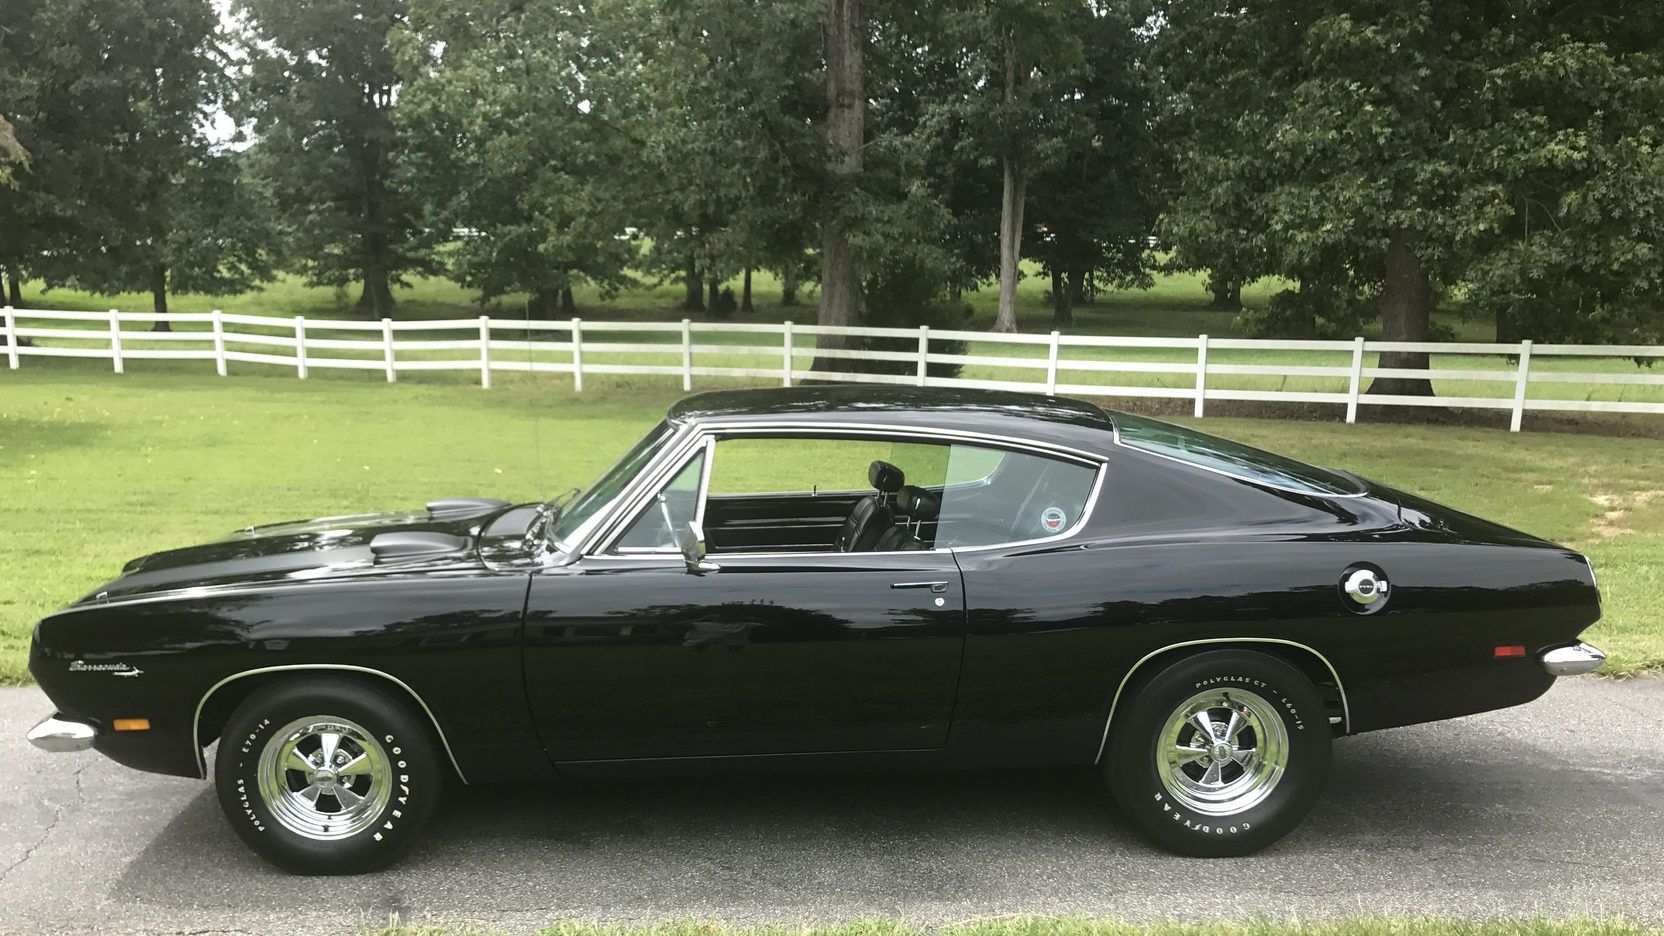 A parked black 1969 Plymouth Barracuda